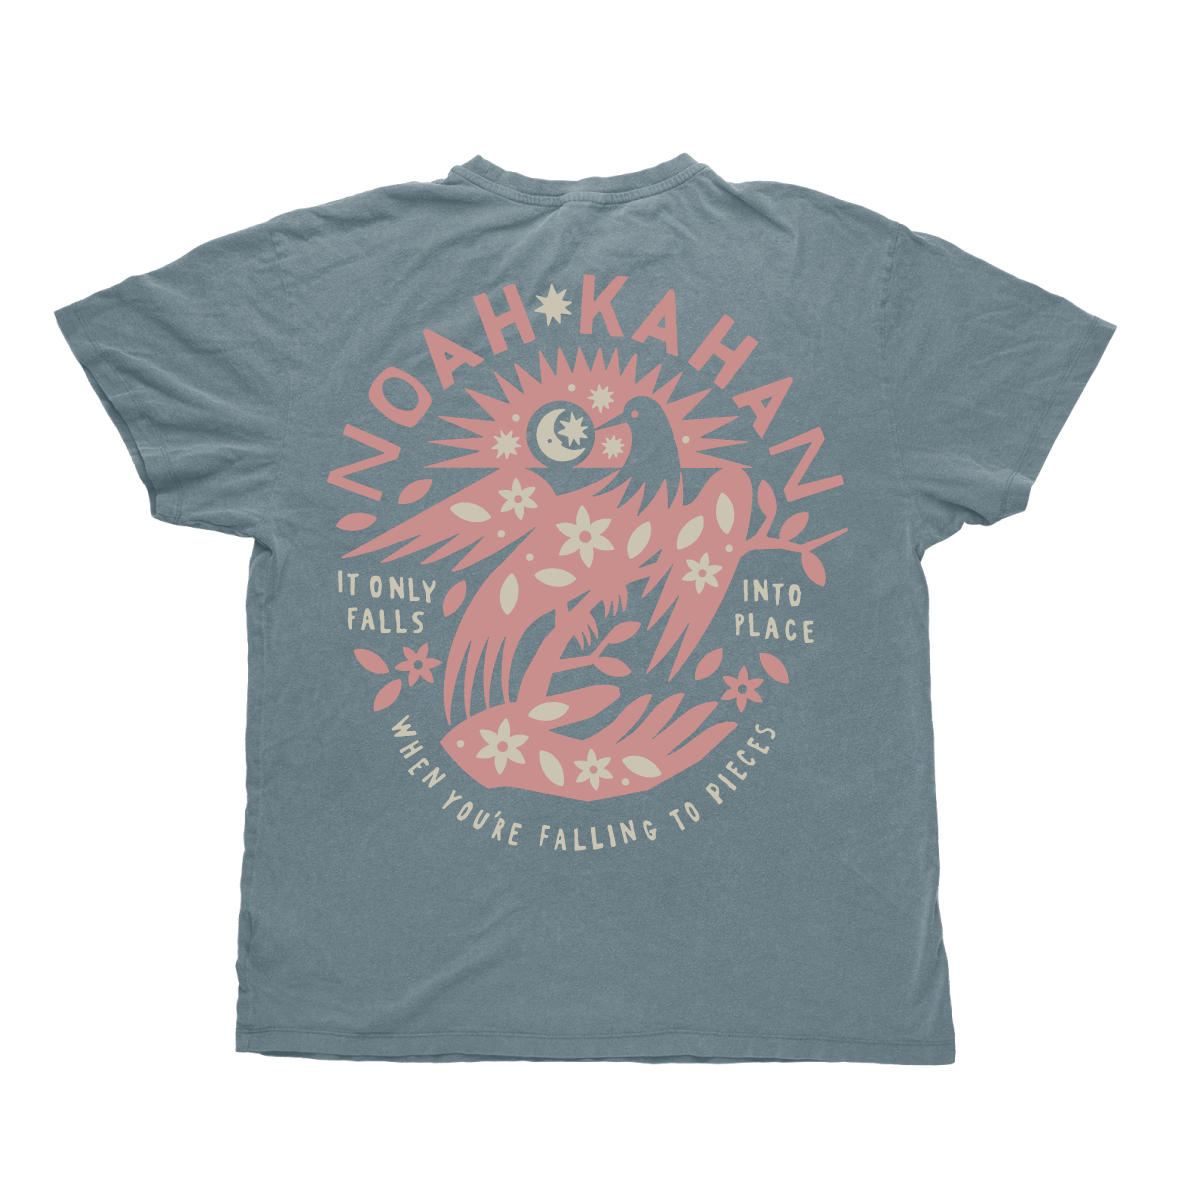 Noah Kahan Ice Blue Comfort Colors Falling to Pieces tee. It only falls into place when you're falling to pieces back art in mauve and cream ink. 